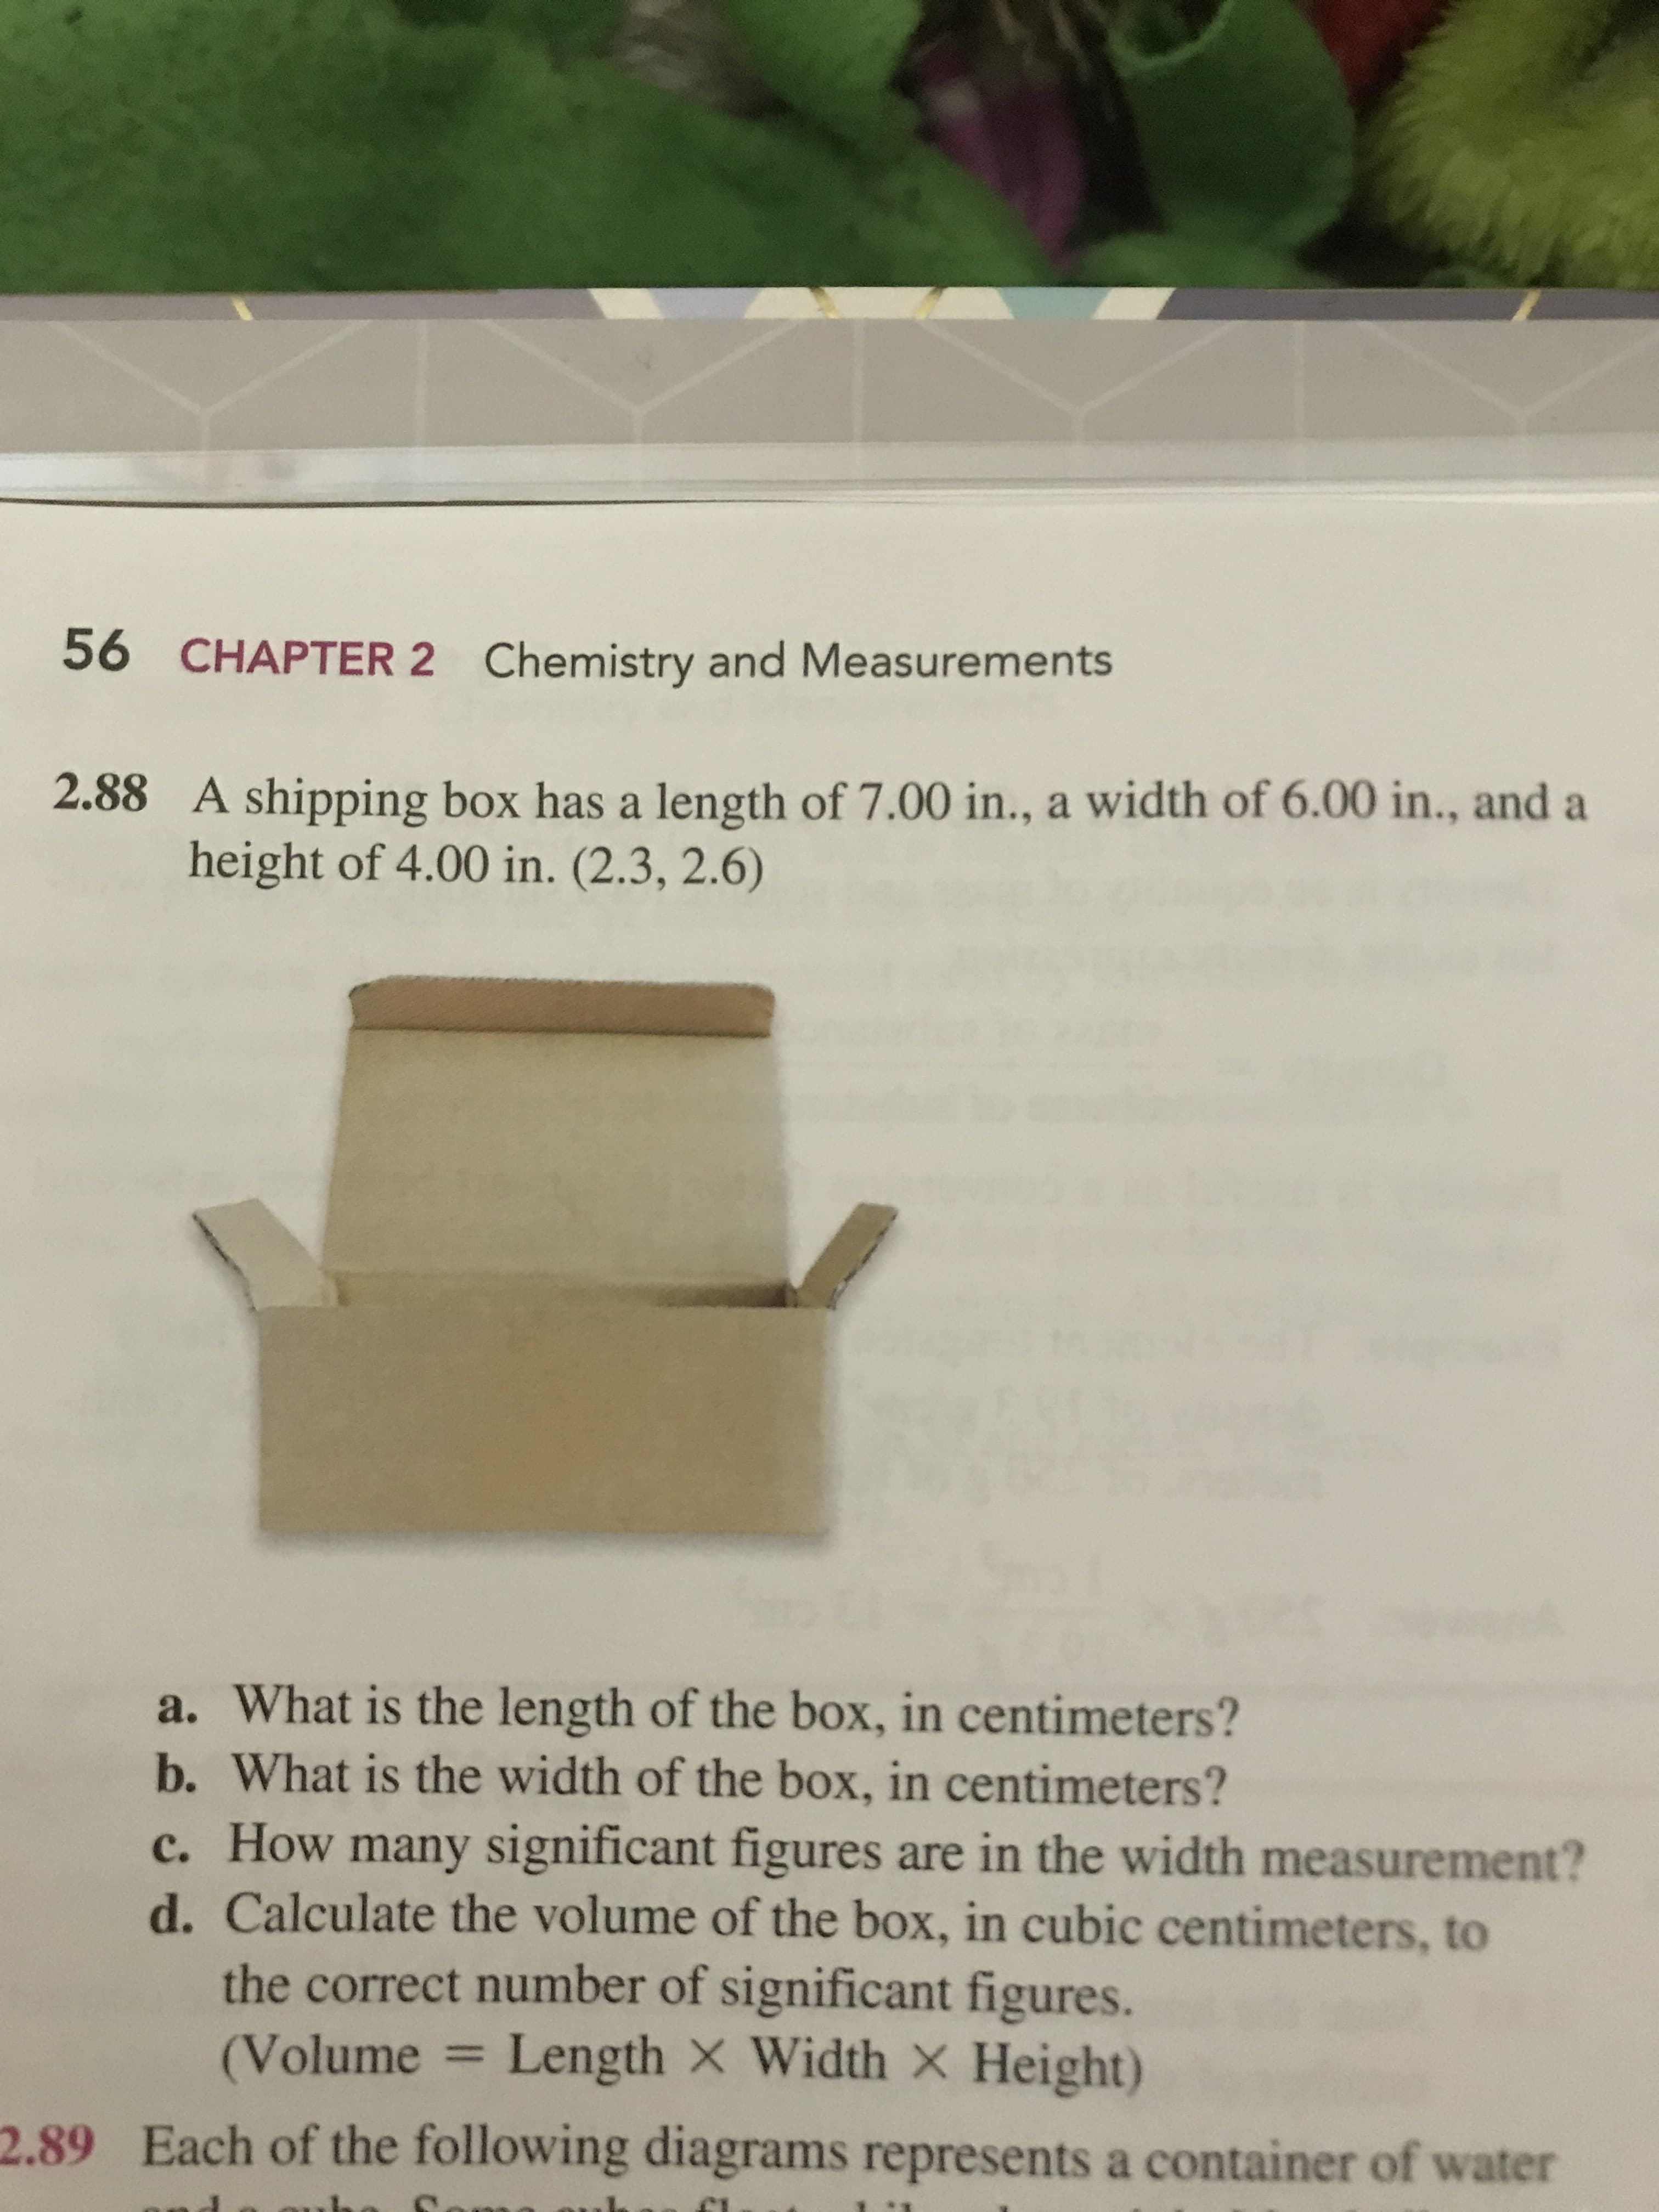 56
CHAPTER 2
Chemistry and Measurements
2.88 A shipping box has a length of 7.00 in., a width of 6.00 in., and a
height of 4.00 in. (2.3, 2.6)
a. What is the length of the box, in centimeters?
b. What is the width of the box, in centimeters?
c. How many significant figures are in the width measurement?
d. Calculate the volume of the box, in cubic centimeters, to
the correct number of significant figures
(Volume = Length × Width × Height)
2.89
Each of the following diagrams represents a container of water
